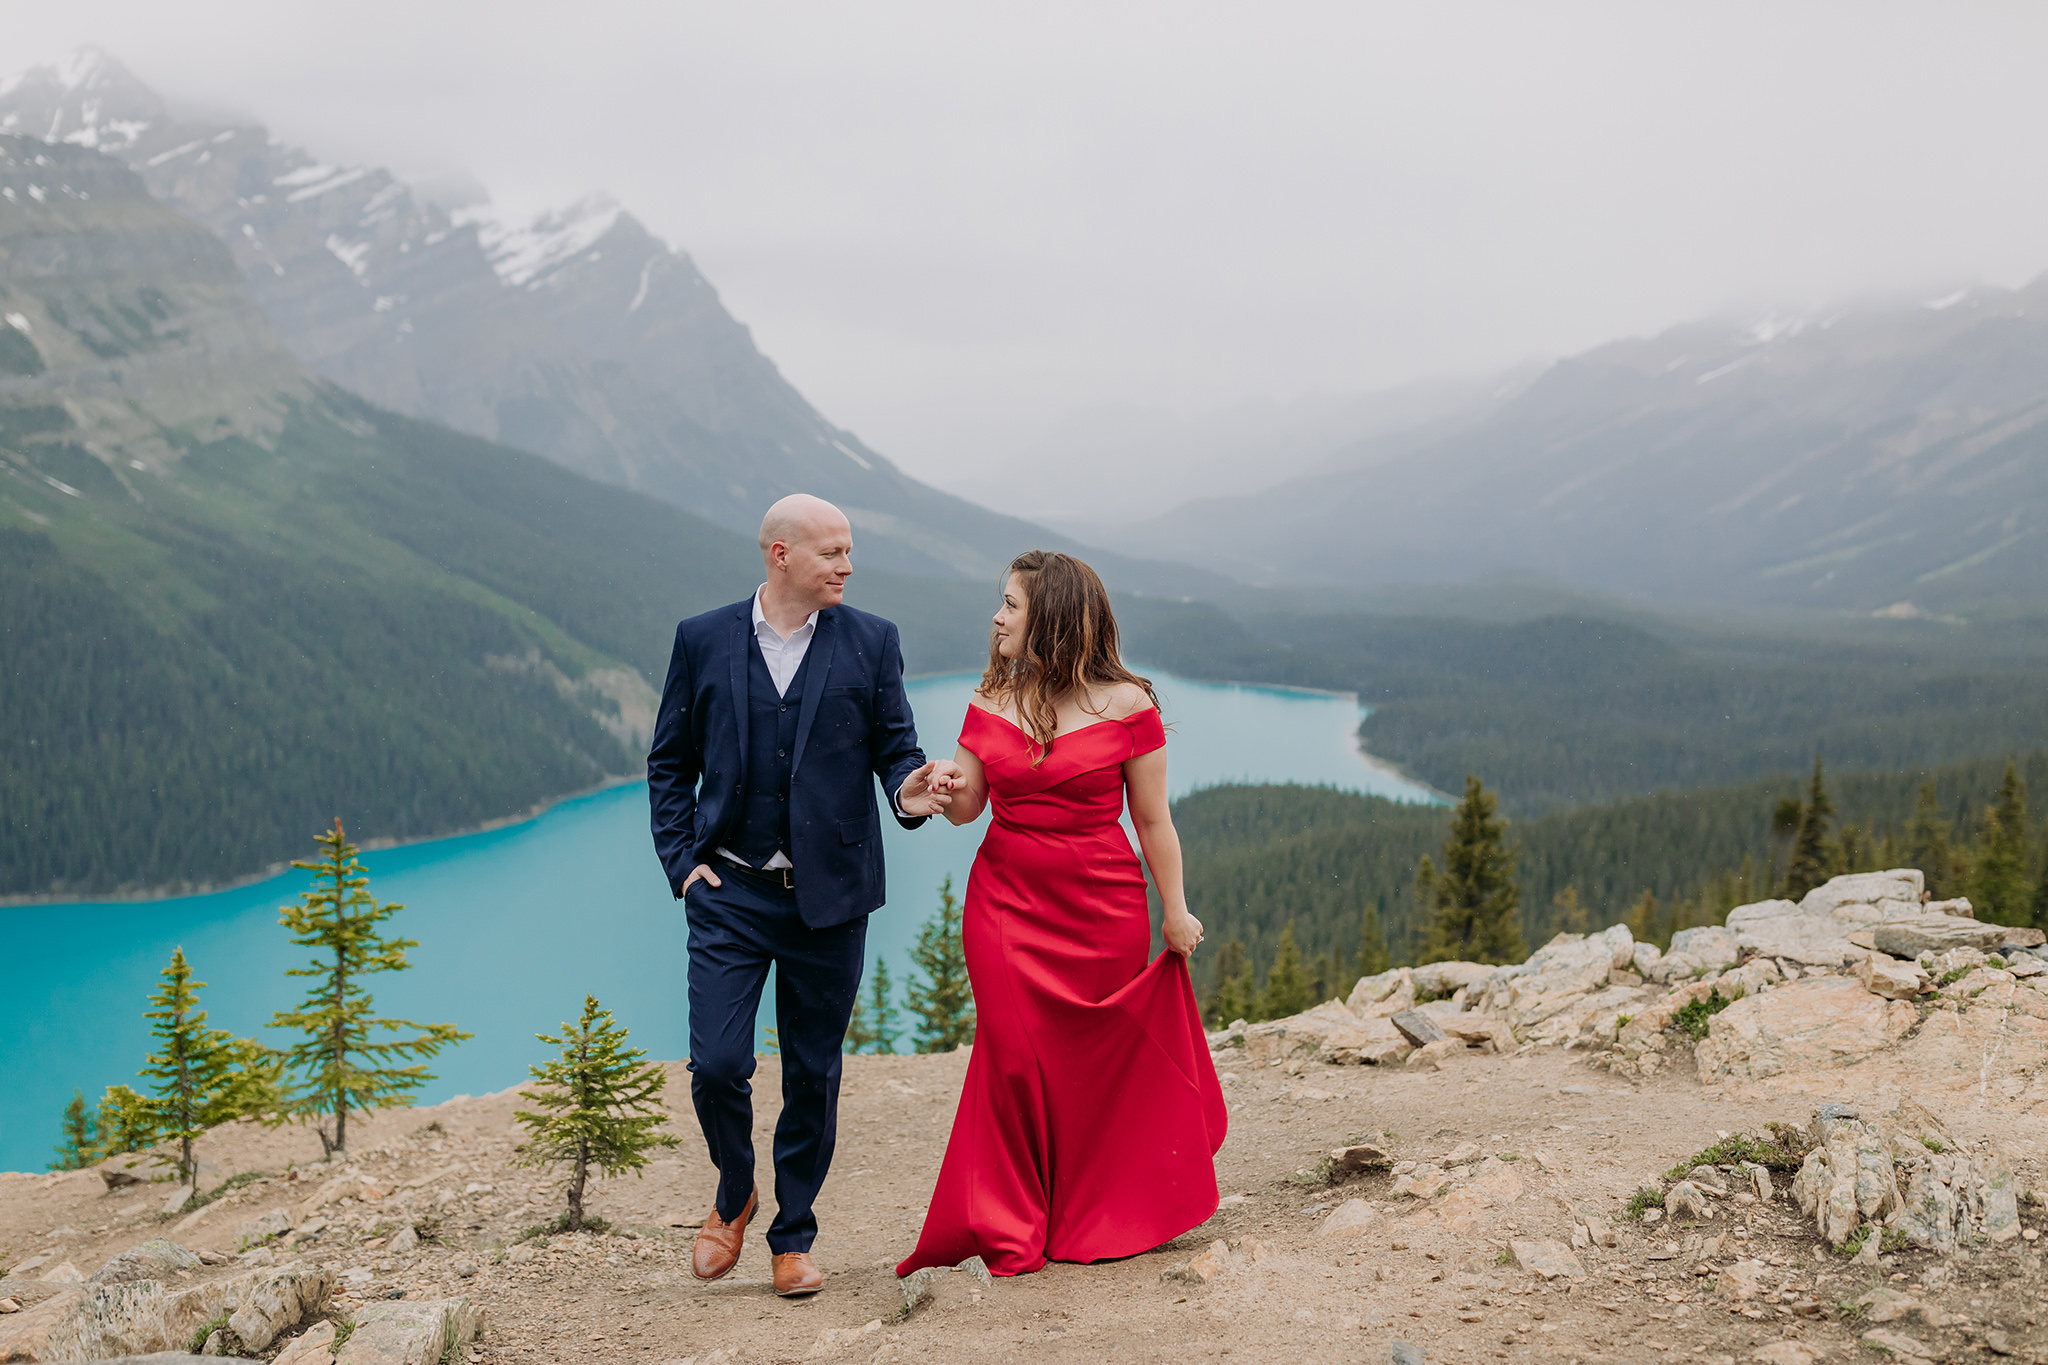 Peyto Lake Formal engagement photos on a cold rainy day in the mountains in Banff National Park. Featuring stunning red evening gown & dramatic blue lake backdrop photographed by ENV Photography